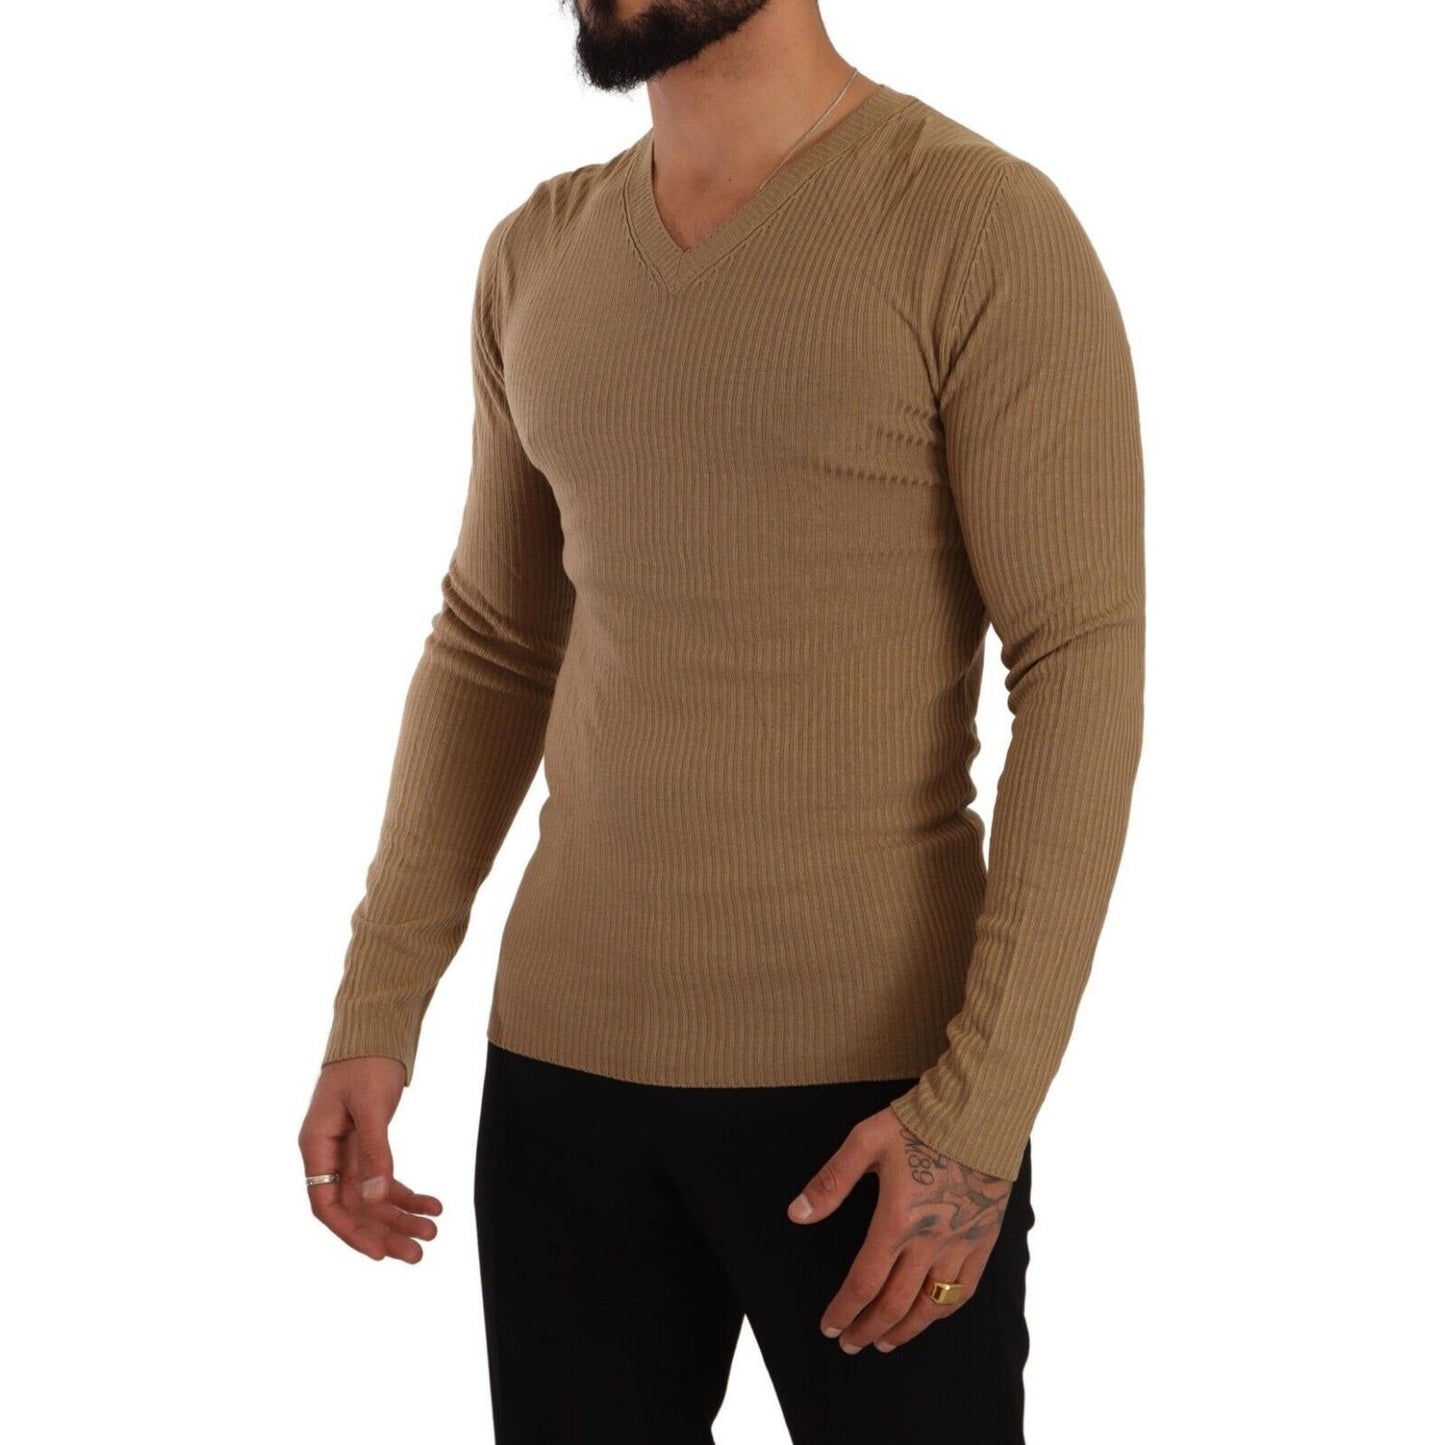 Ermanno Scervino Classic V-Neck Wool Sweater in Brown brown-wool-knit-v-neck-men-pullover-sweater s-l1600-62-1-f2c723ab-494.jpg